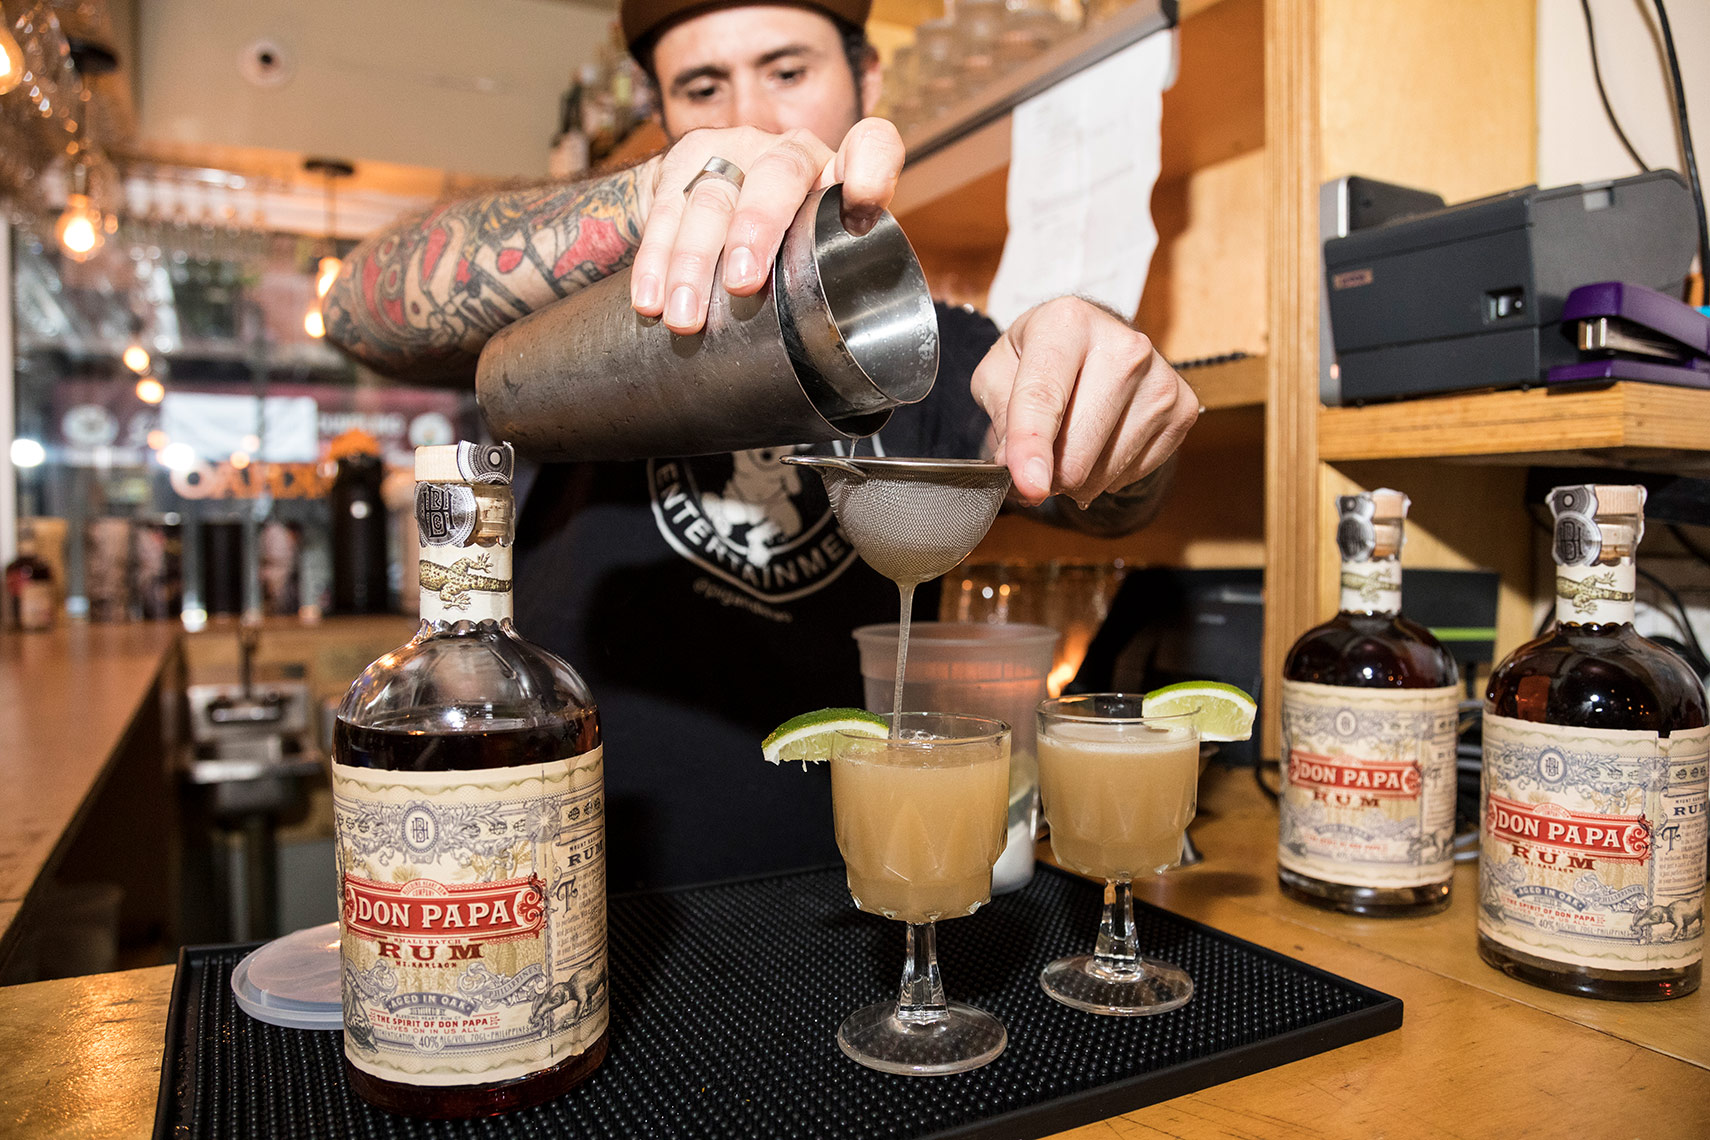 Don Papa Launched their Rum at the Pig & Khao